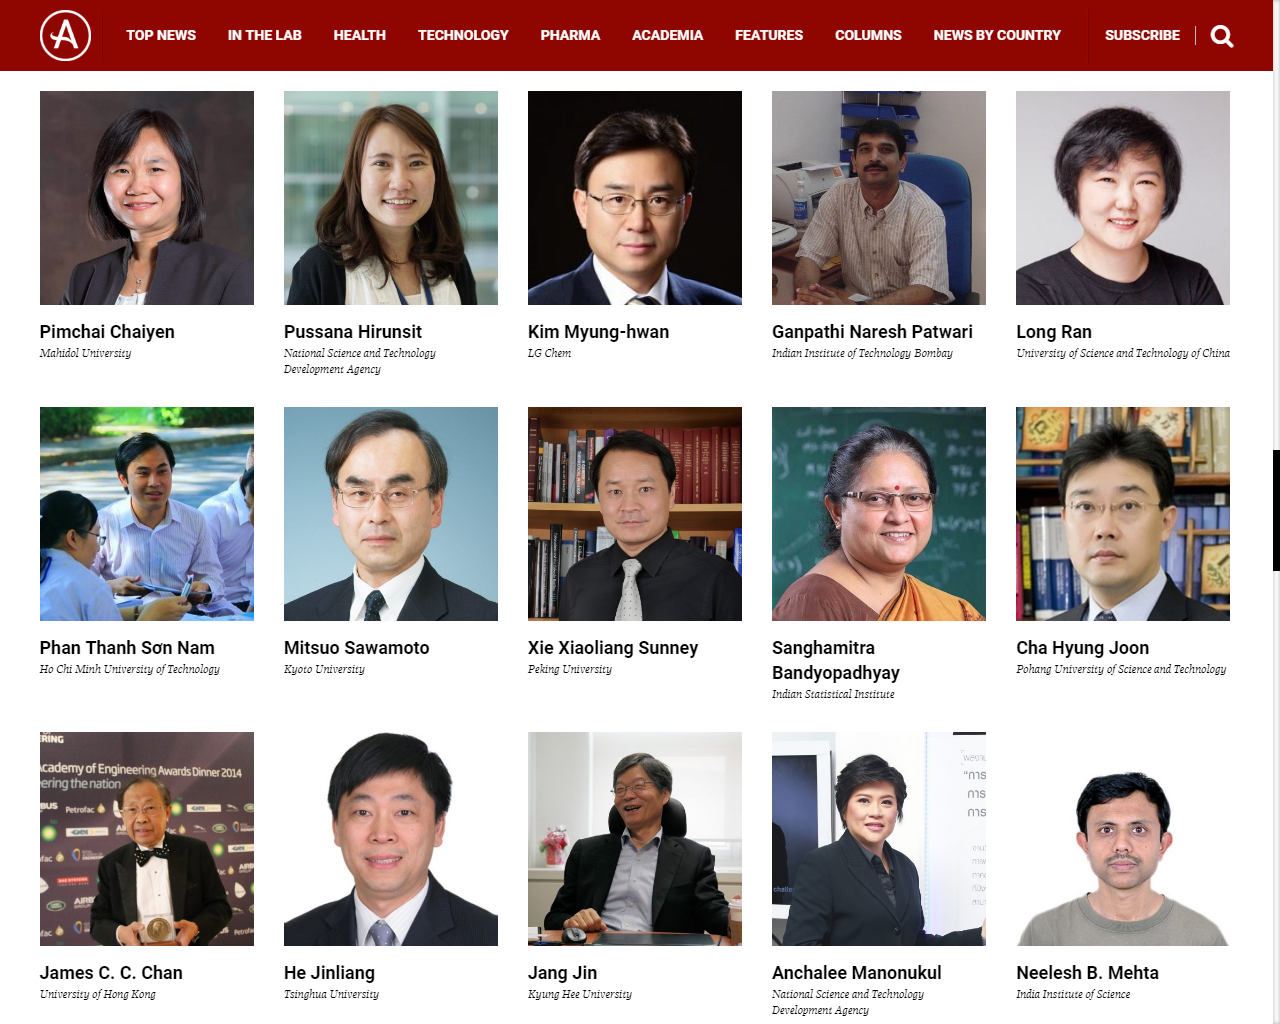 ​Vietnamese scientists listed among Asia’s best by Singapore magazine